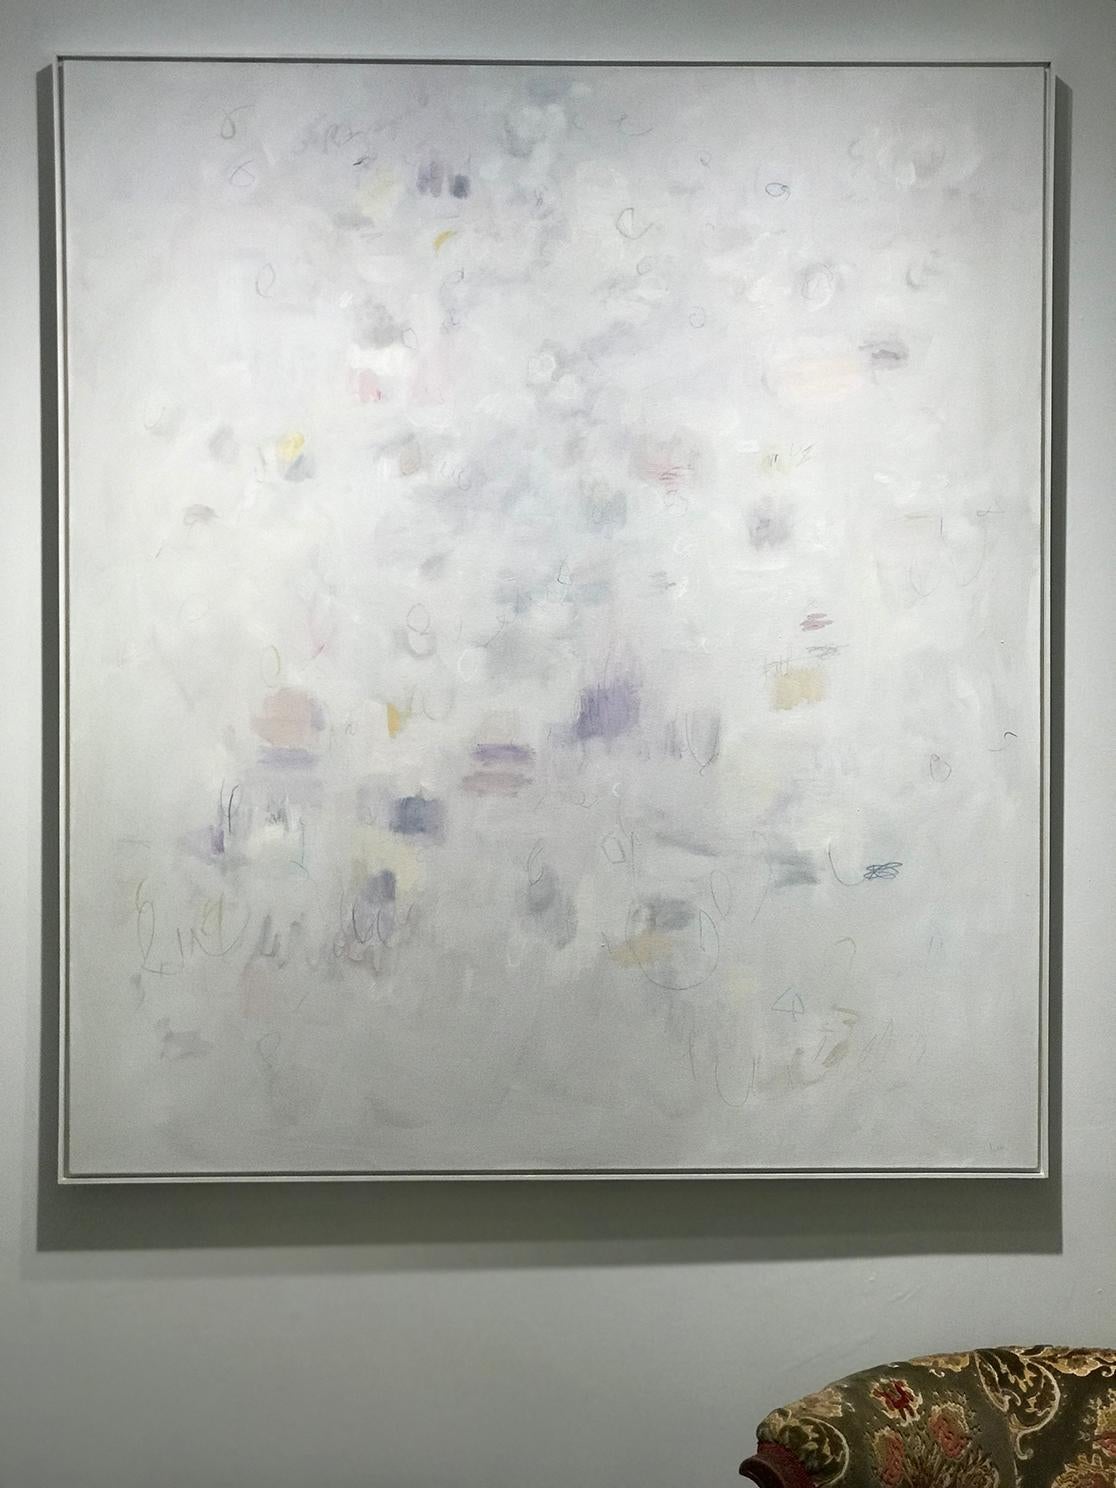 Oil paint, oil pastel and pencil on canvas. Framed

Linc Thelen’s abstractions are pleasant investigations into the formal issues of abstraction. His common forms are the circle, the line, the scallop, and the scribble. These forms construct